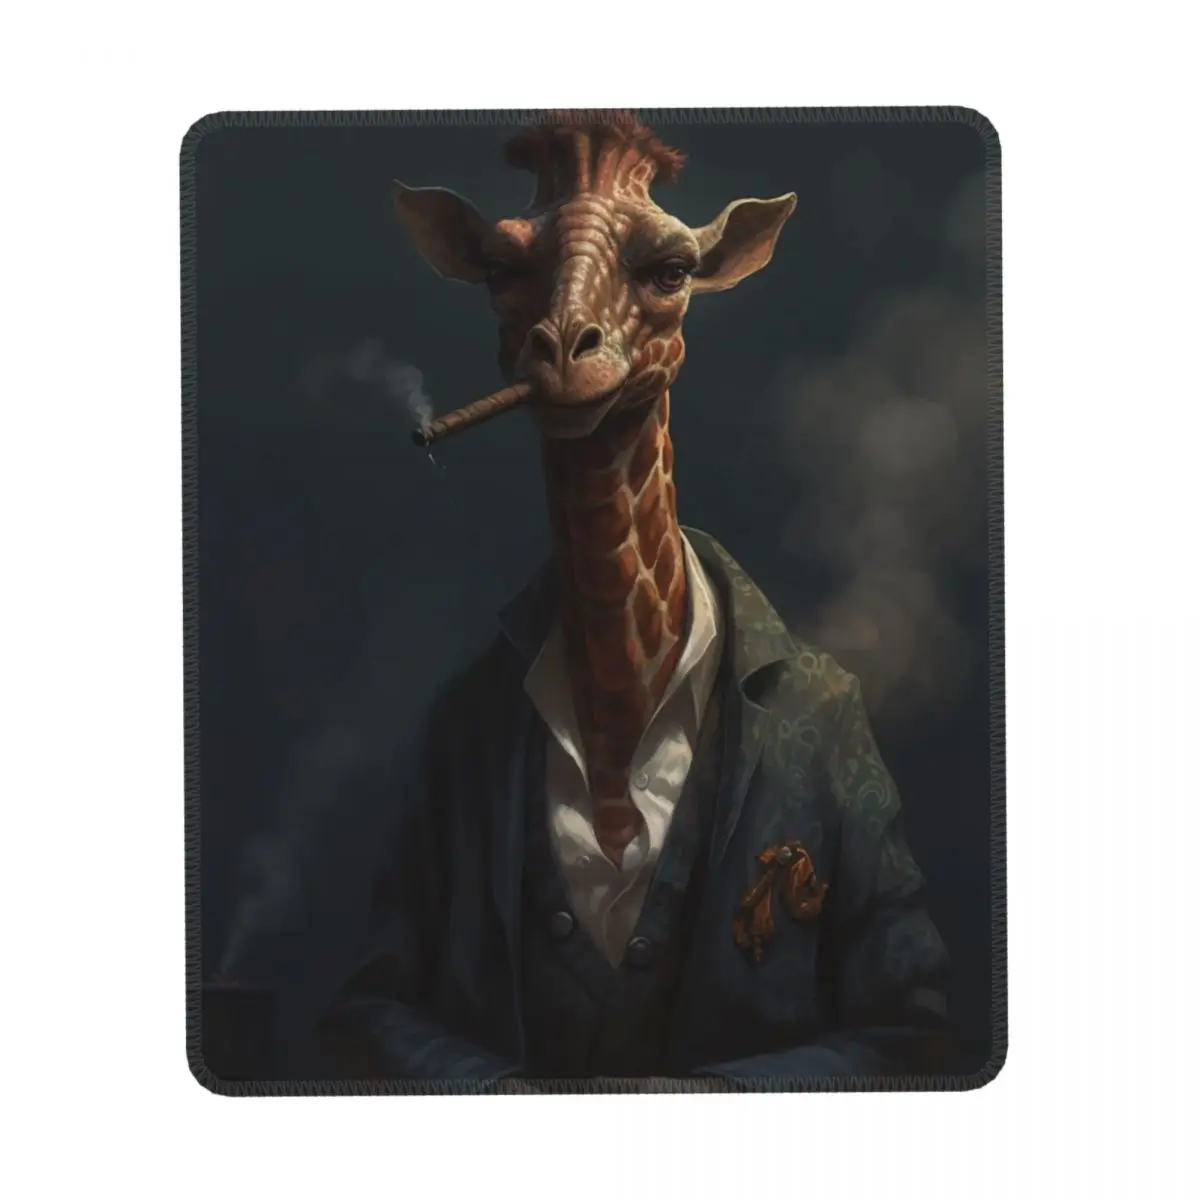 

Giraffe Vertical Print Mouse Pad Godfather Gangster-style Rertro Quality Mousepad Table Anti-Slip Rubber Mouse Pads